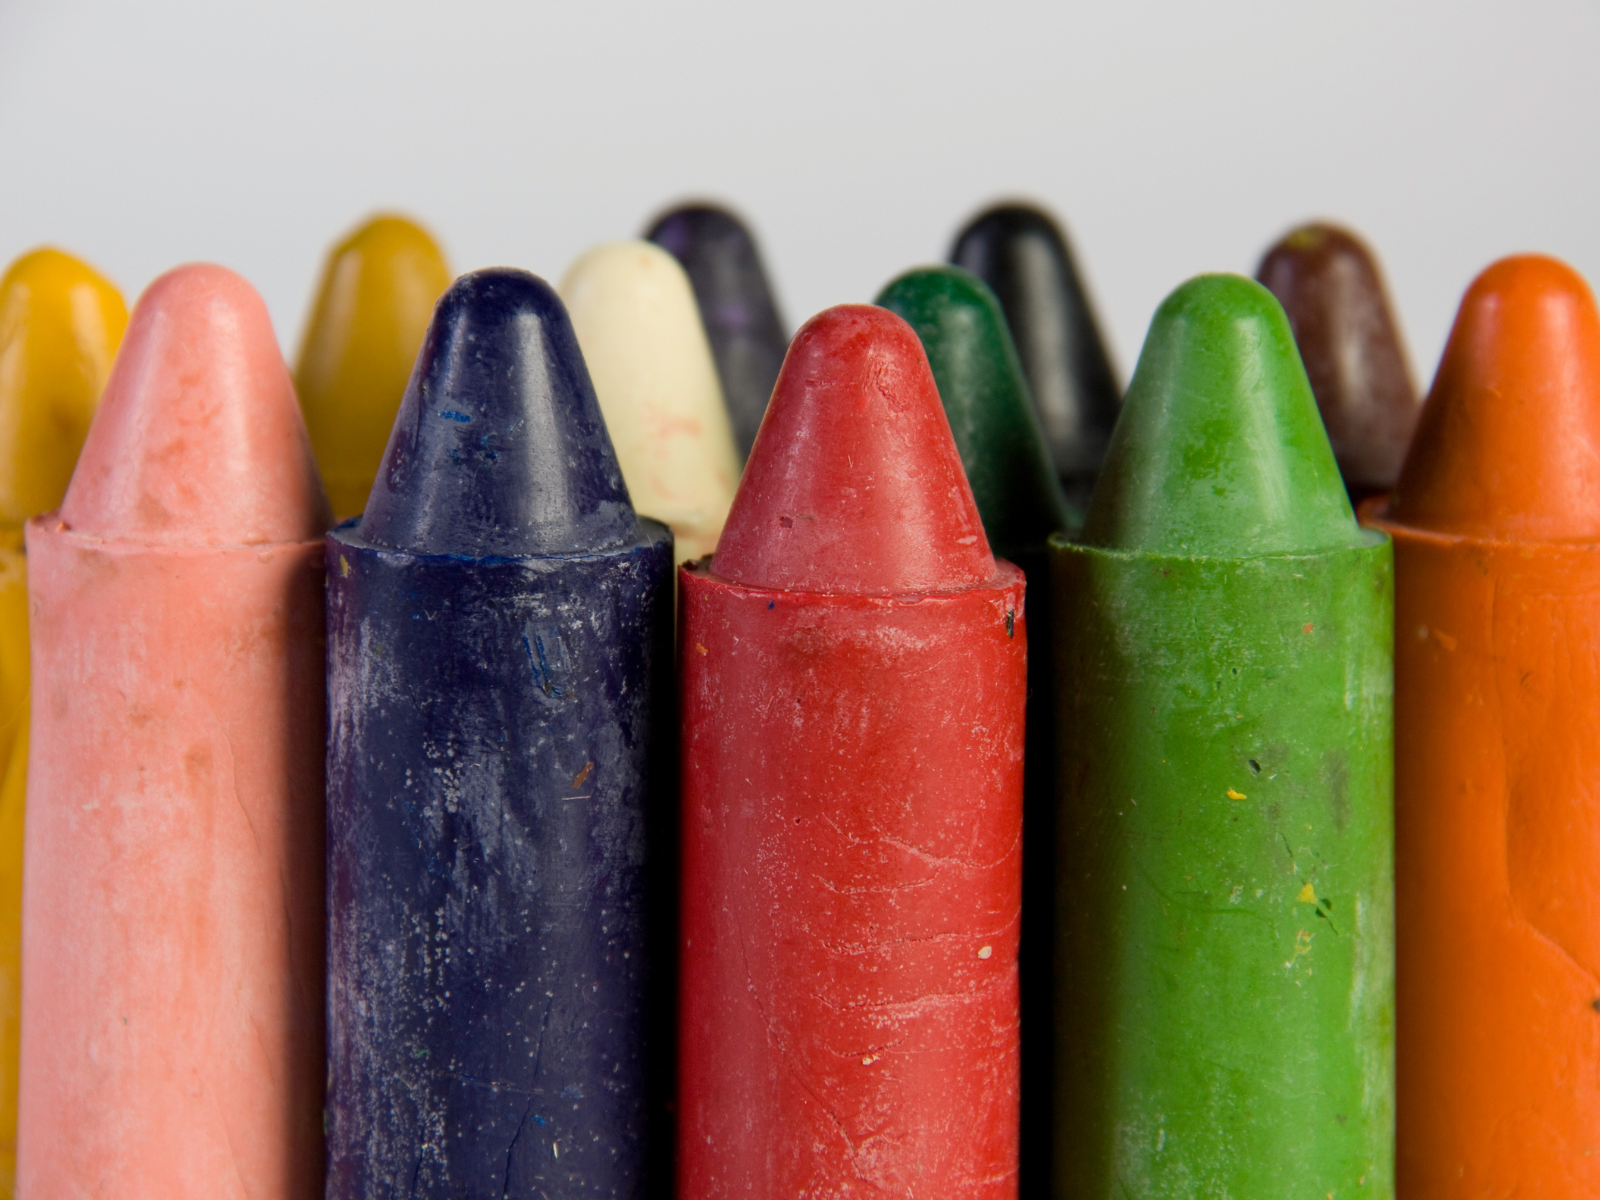 What Crayons Don't Smudge? Unlock the Secret to Pristine Art!